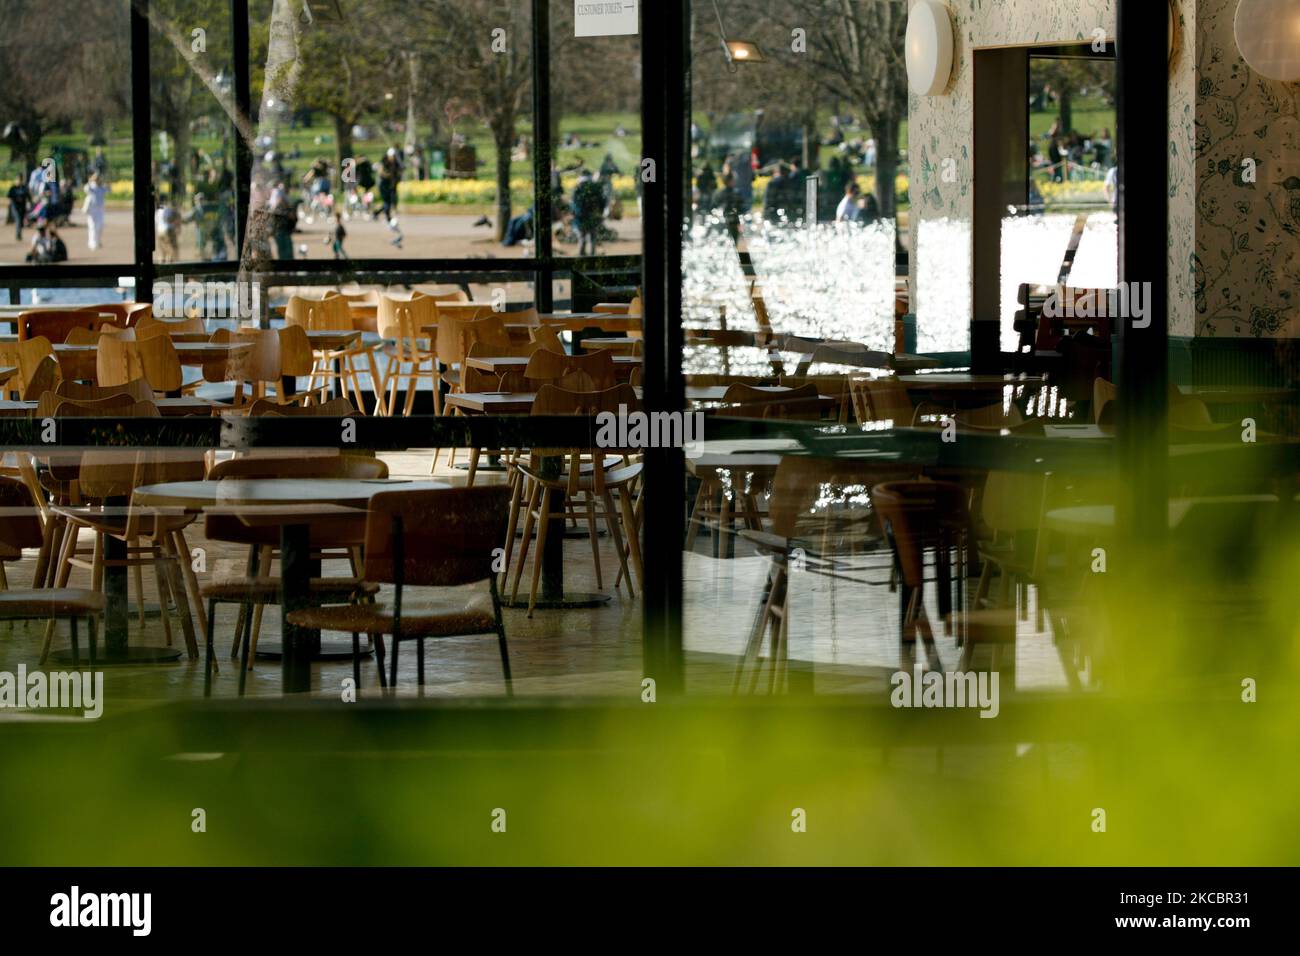 Empty tables are seen in the indoor area of a temporarily-closed cafe beside the Serpentine lake in Hyde Park in London, England, on March 29, 2021. Lockdown restrictions were eased across England today, with the 'stay home' rule ended, groups of up to six allowed to meet outside, outdoor sports restarted and weddings with up to six people attending permitted to go ahead. Shops, hospitality and leisure businesses remain closed however, with the next relaxation of restrictions not due until April 12 at the earliest. Today's easing has meanwhile coincided with the first of a three-day 'mini-heat Stock Photo